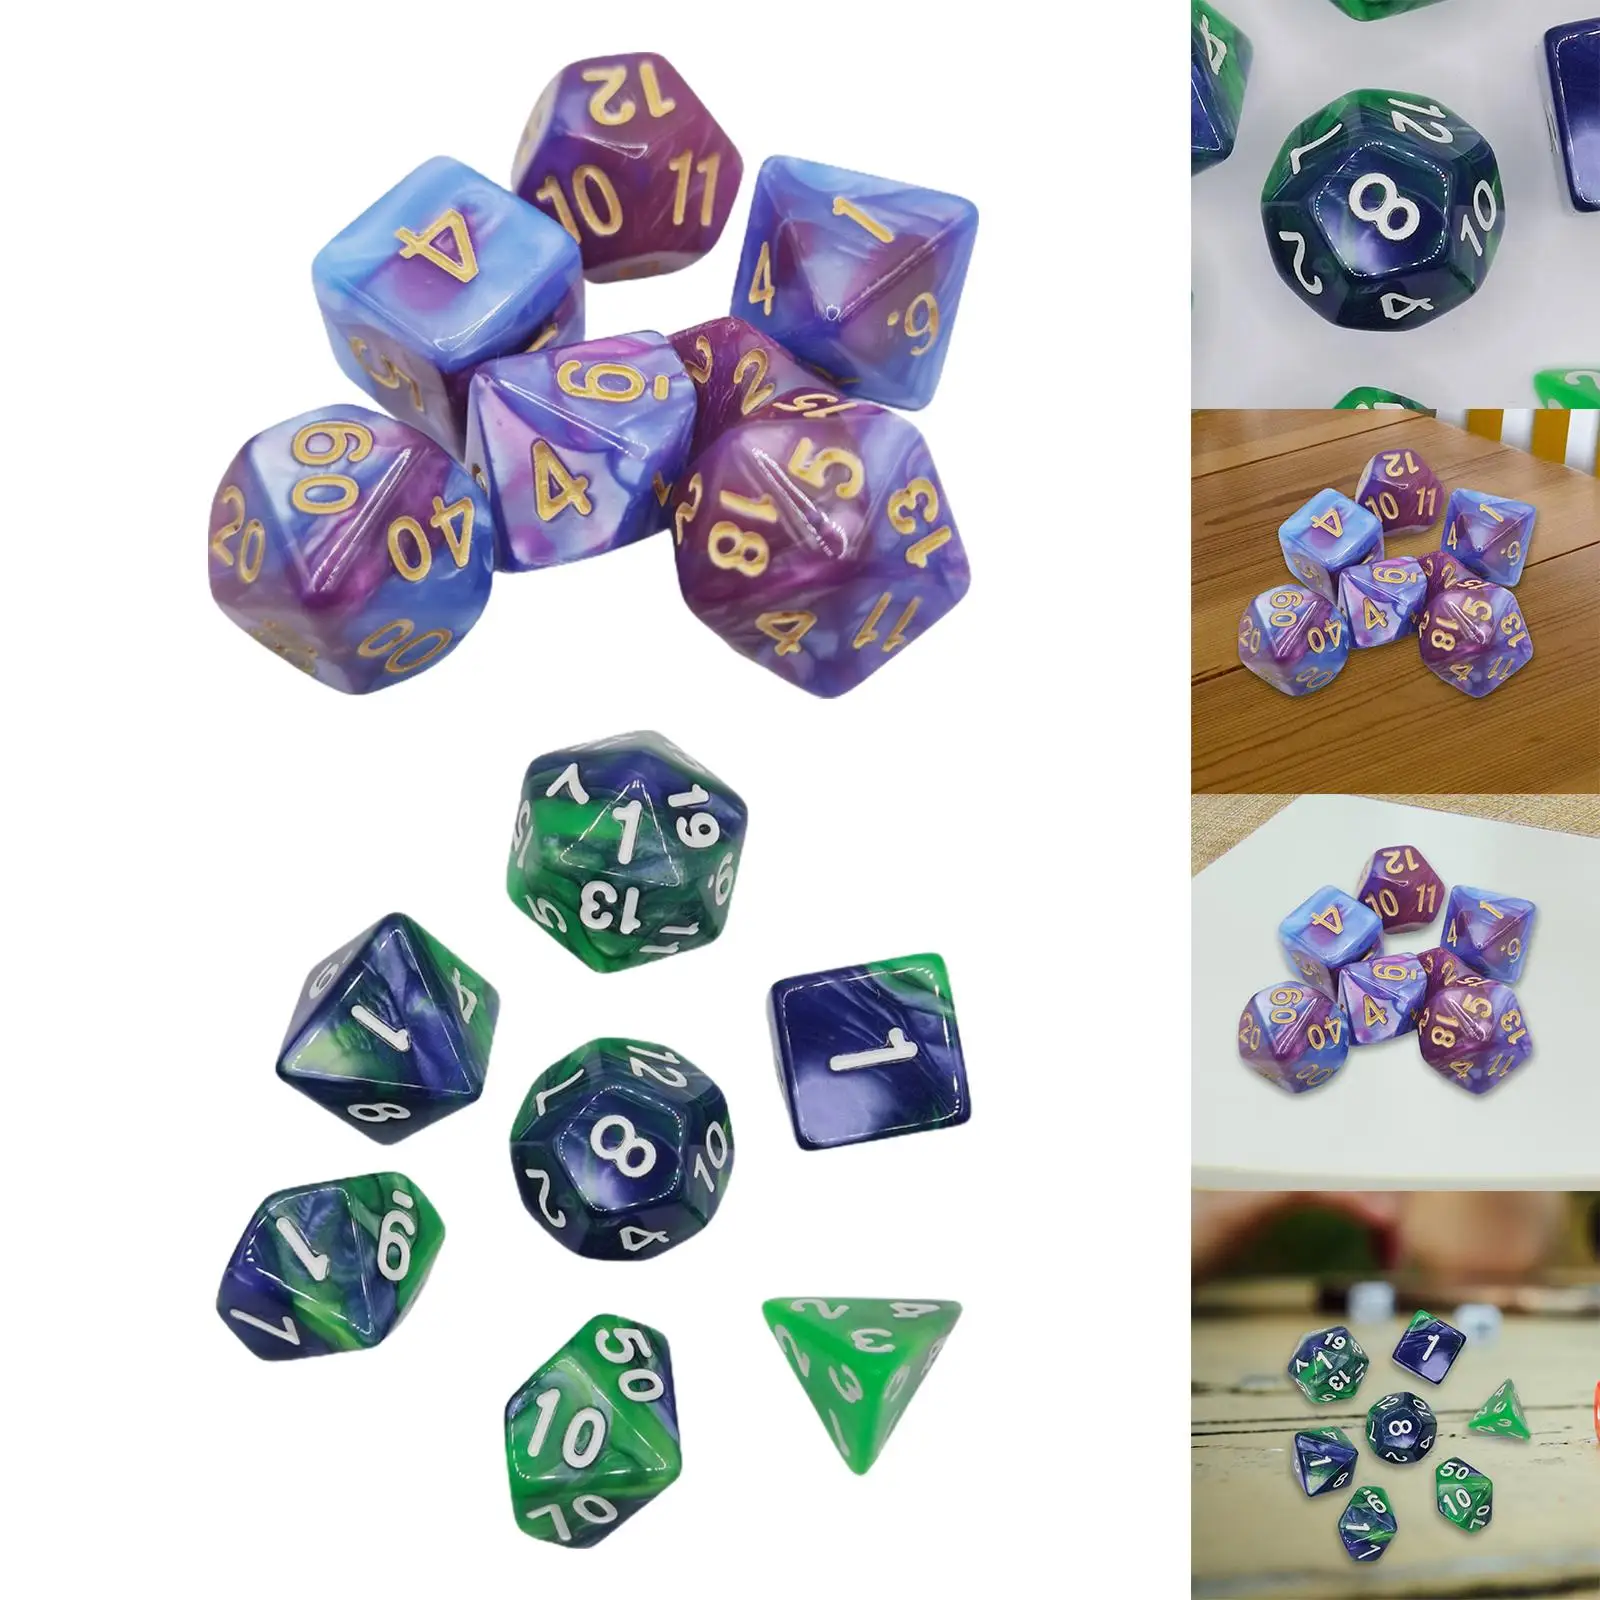 7 Pieces Polyhedral Dice Round Corner Acrylic Dice for Table Games Party Favors